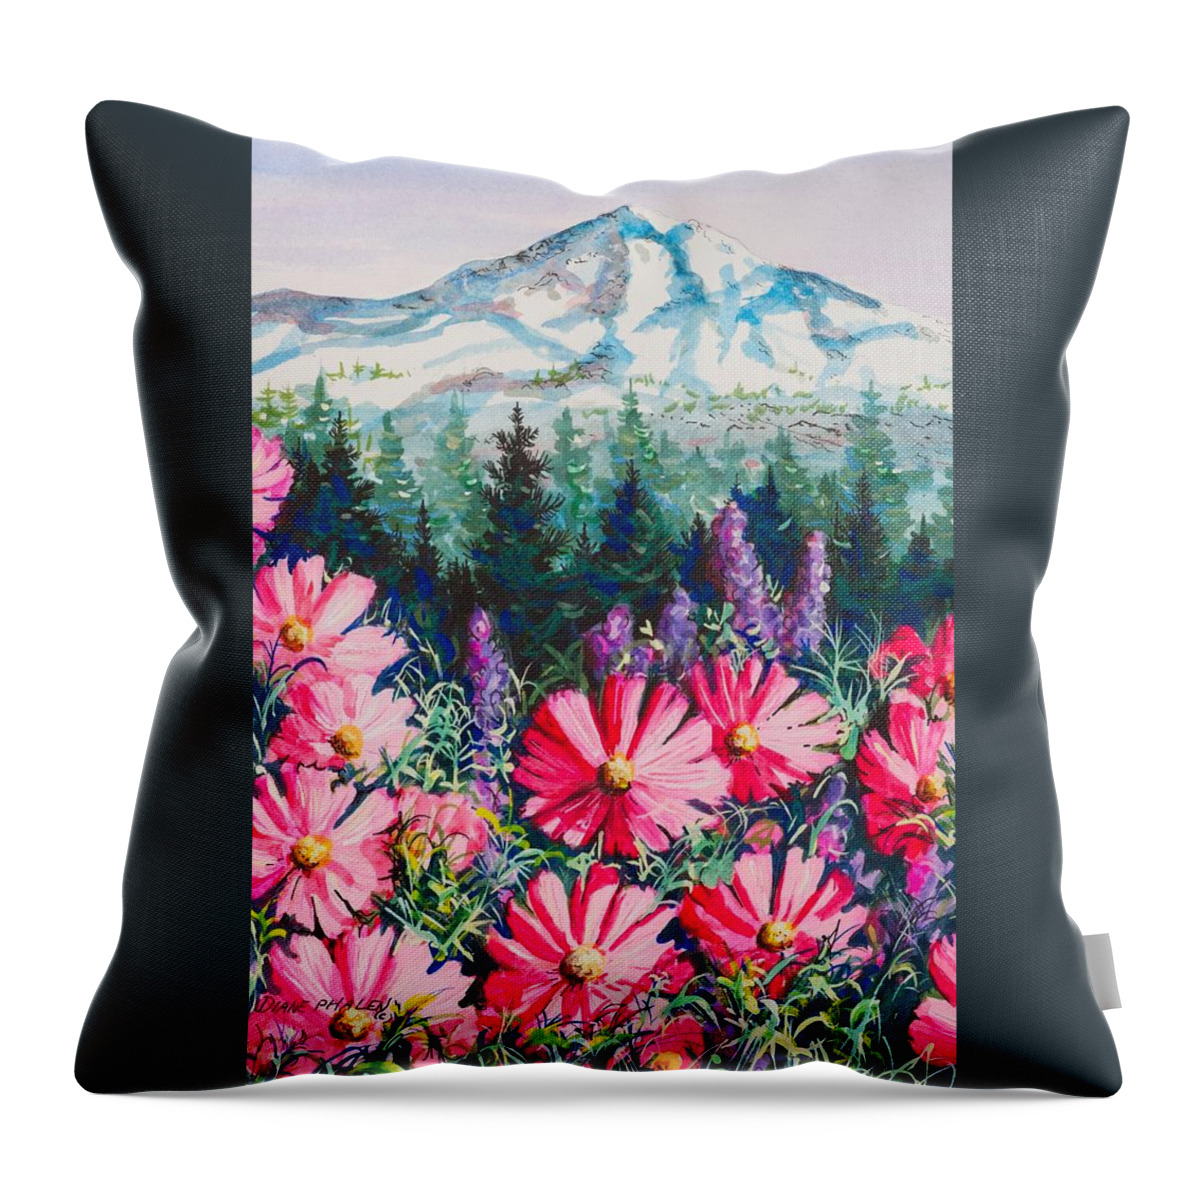 Mountain Throw Pillow featuring the painting Mt. Hood Cosmos by Diane Phalen